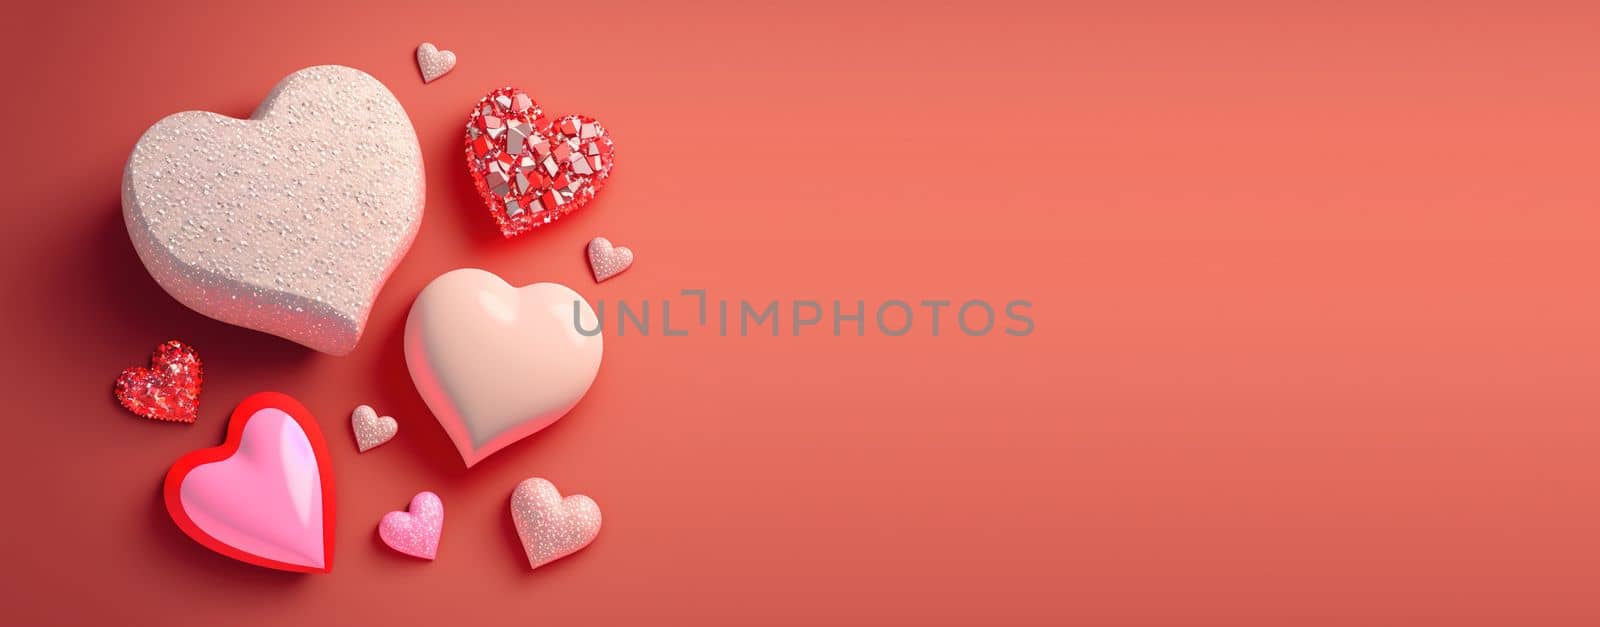 Luxurious 3D Heart, Diamond, and Crystal Illustration for Valentine's Day Background and Banner by templator